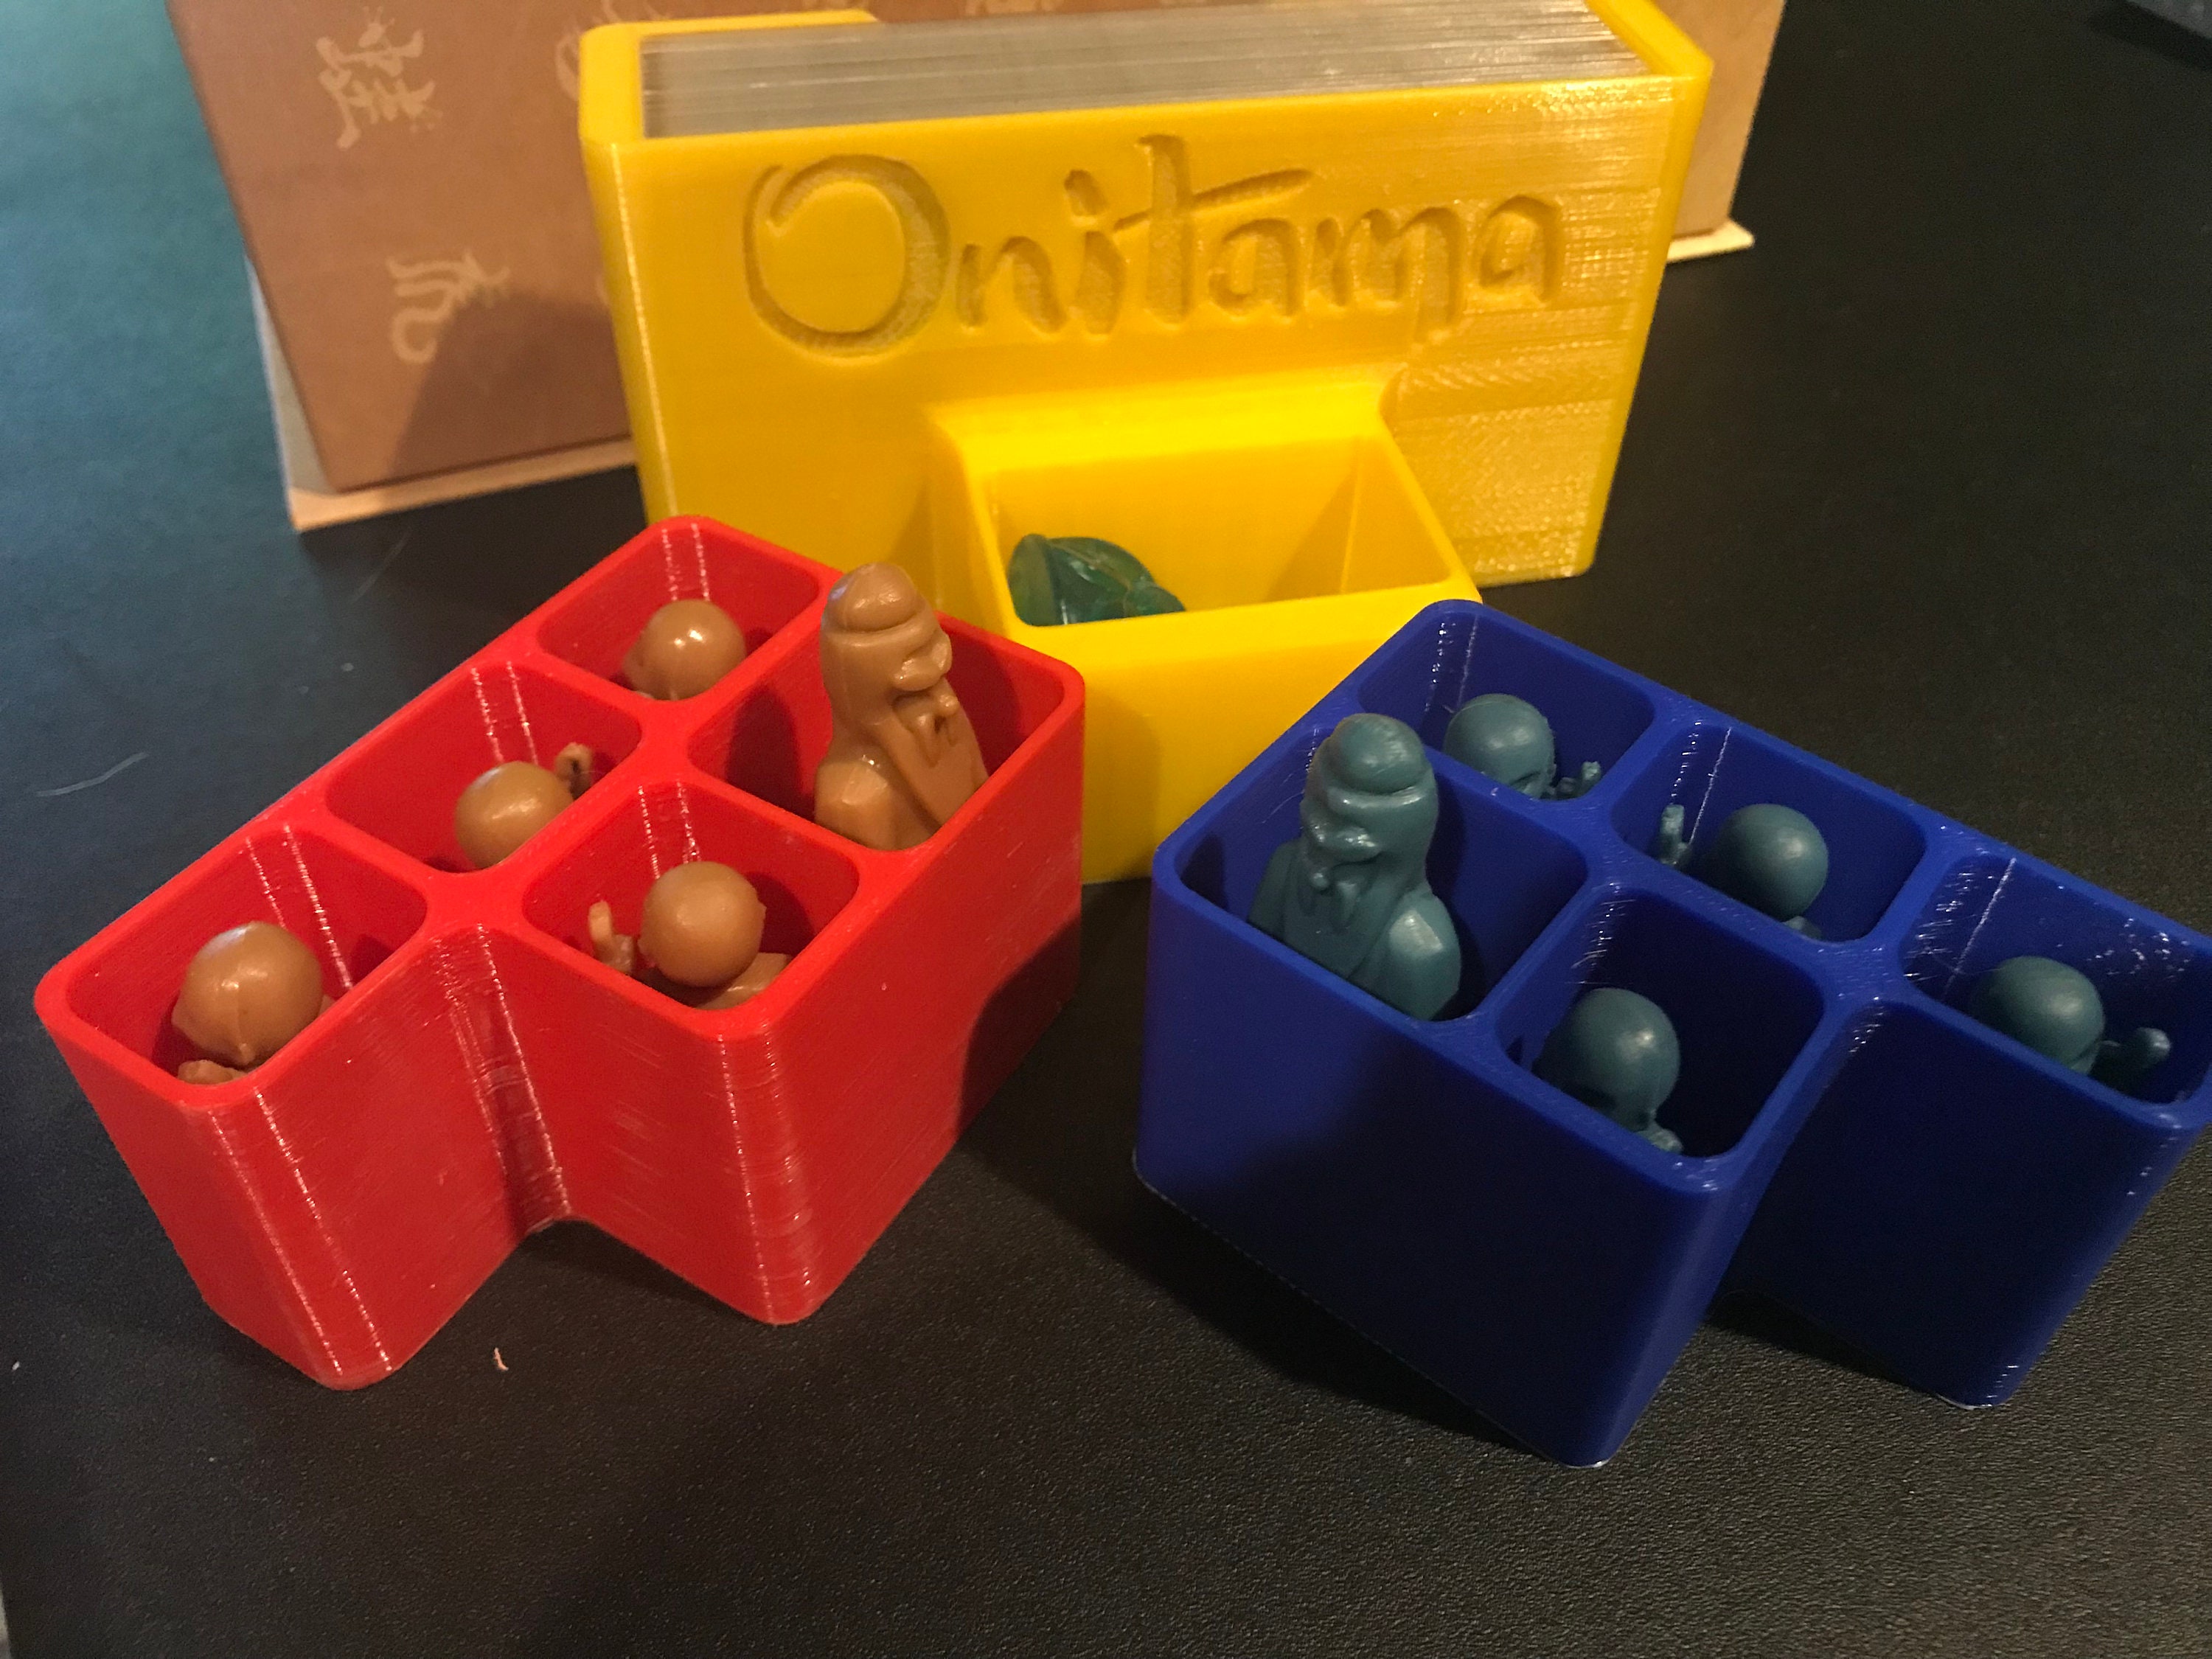 Cyclades Board Game Organizer Insert with Titans 3D model 3D printable